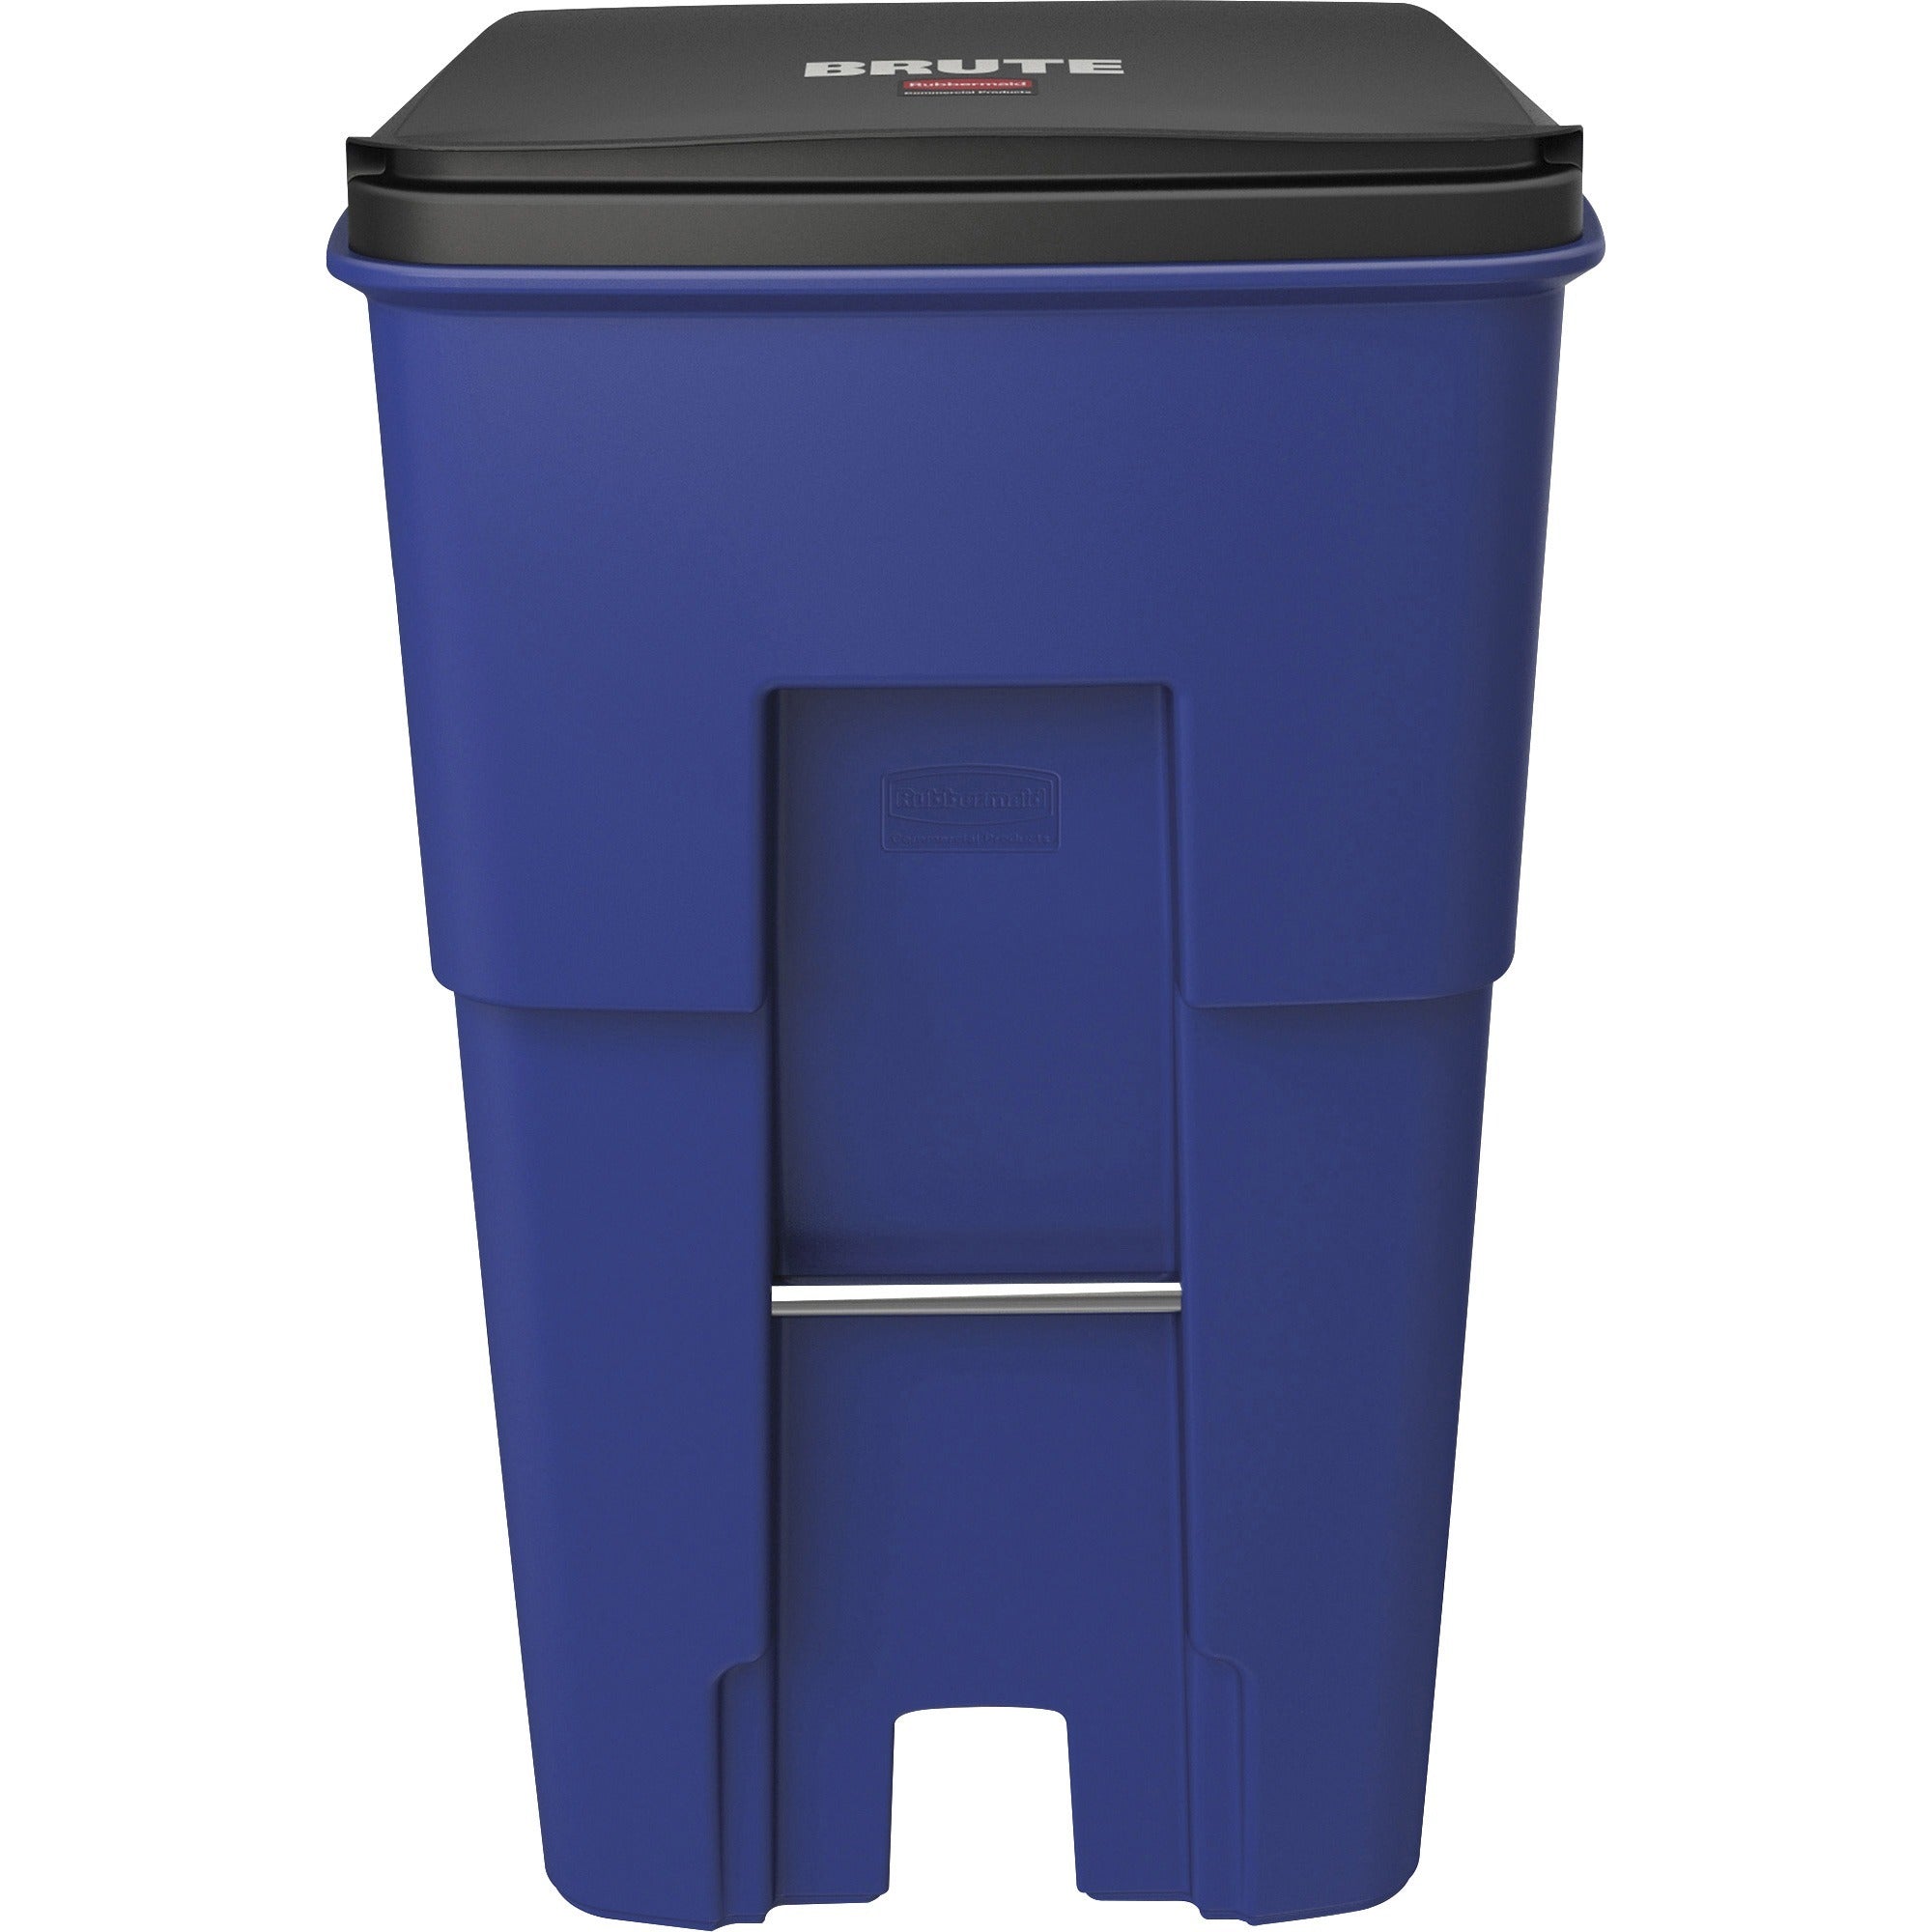 rubbermaid-commercial-brute-95-gallon-rollout-container-rollout-lid-95-gal-capacity-mobility-heavy-duty-wheels-reinforced-smooth-ergonomic-handle-uv-resistant-46-height-x-372-width-x-286-depth-blue-1-each_rcp9w2273blu - 2